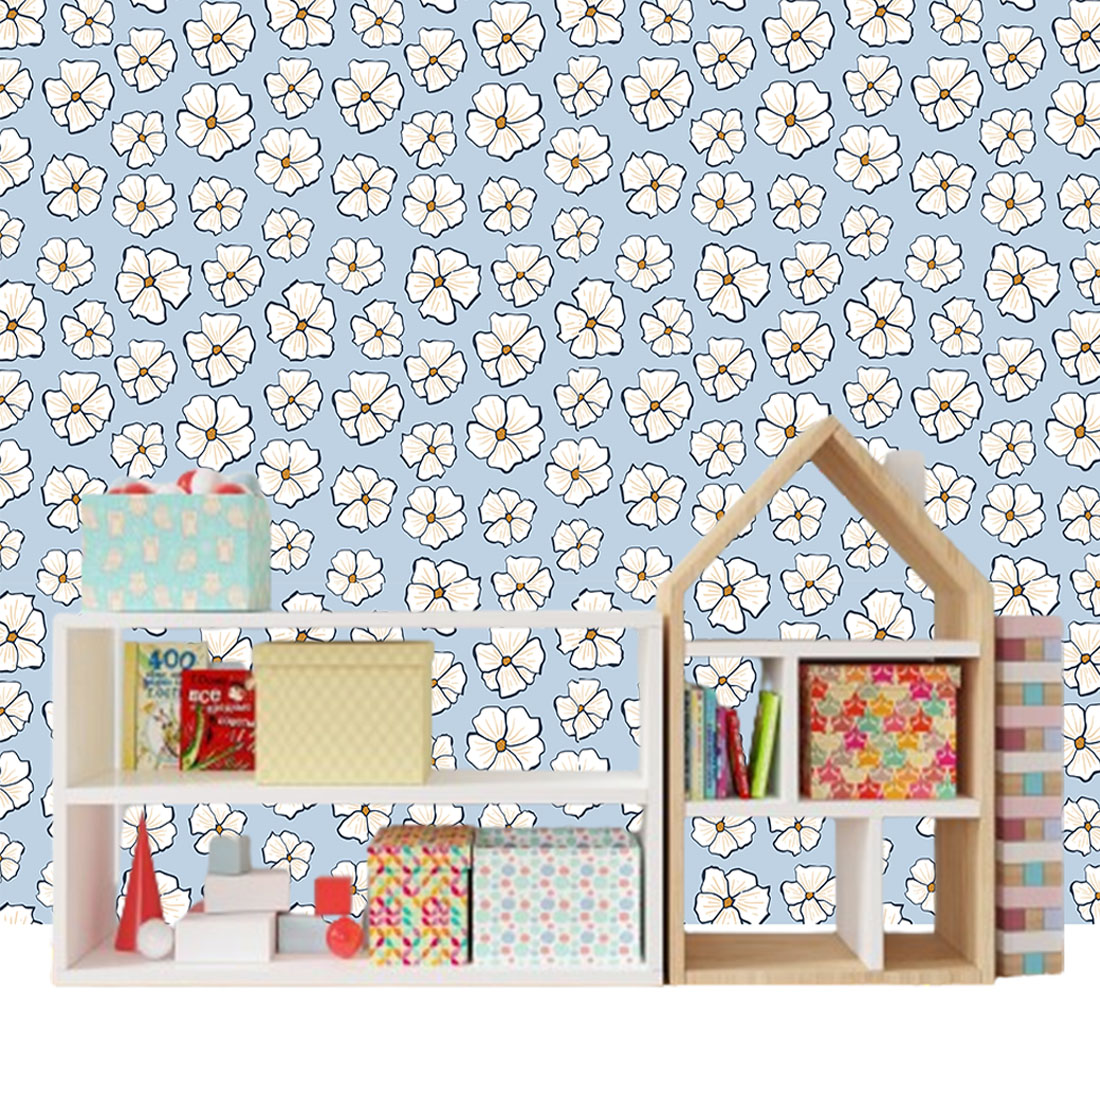 WhimsyWalls: Transform Your Kid's World with Enchanting Wallpaper Designs! preview image.